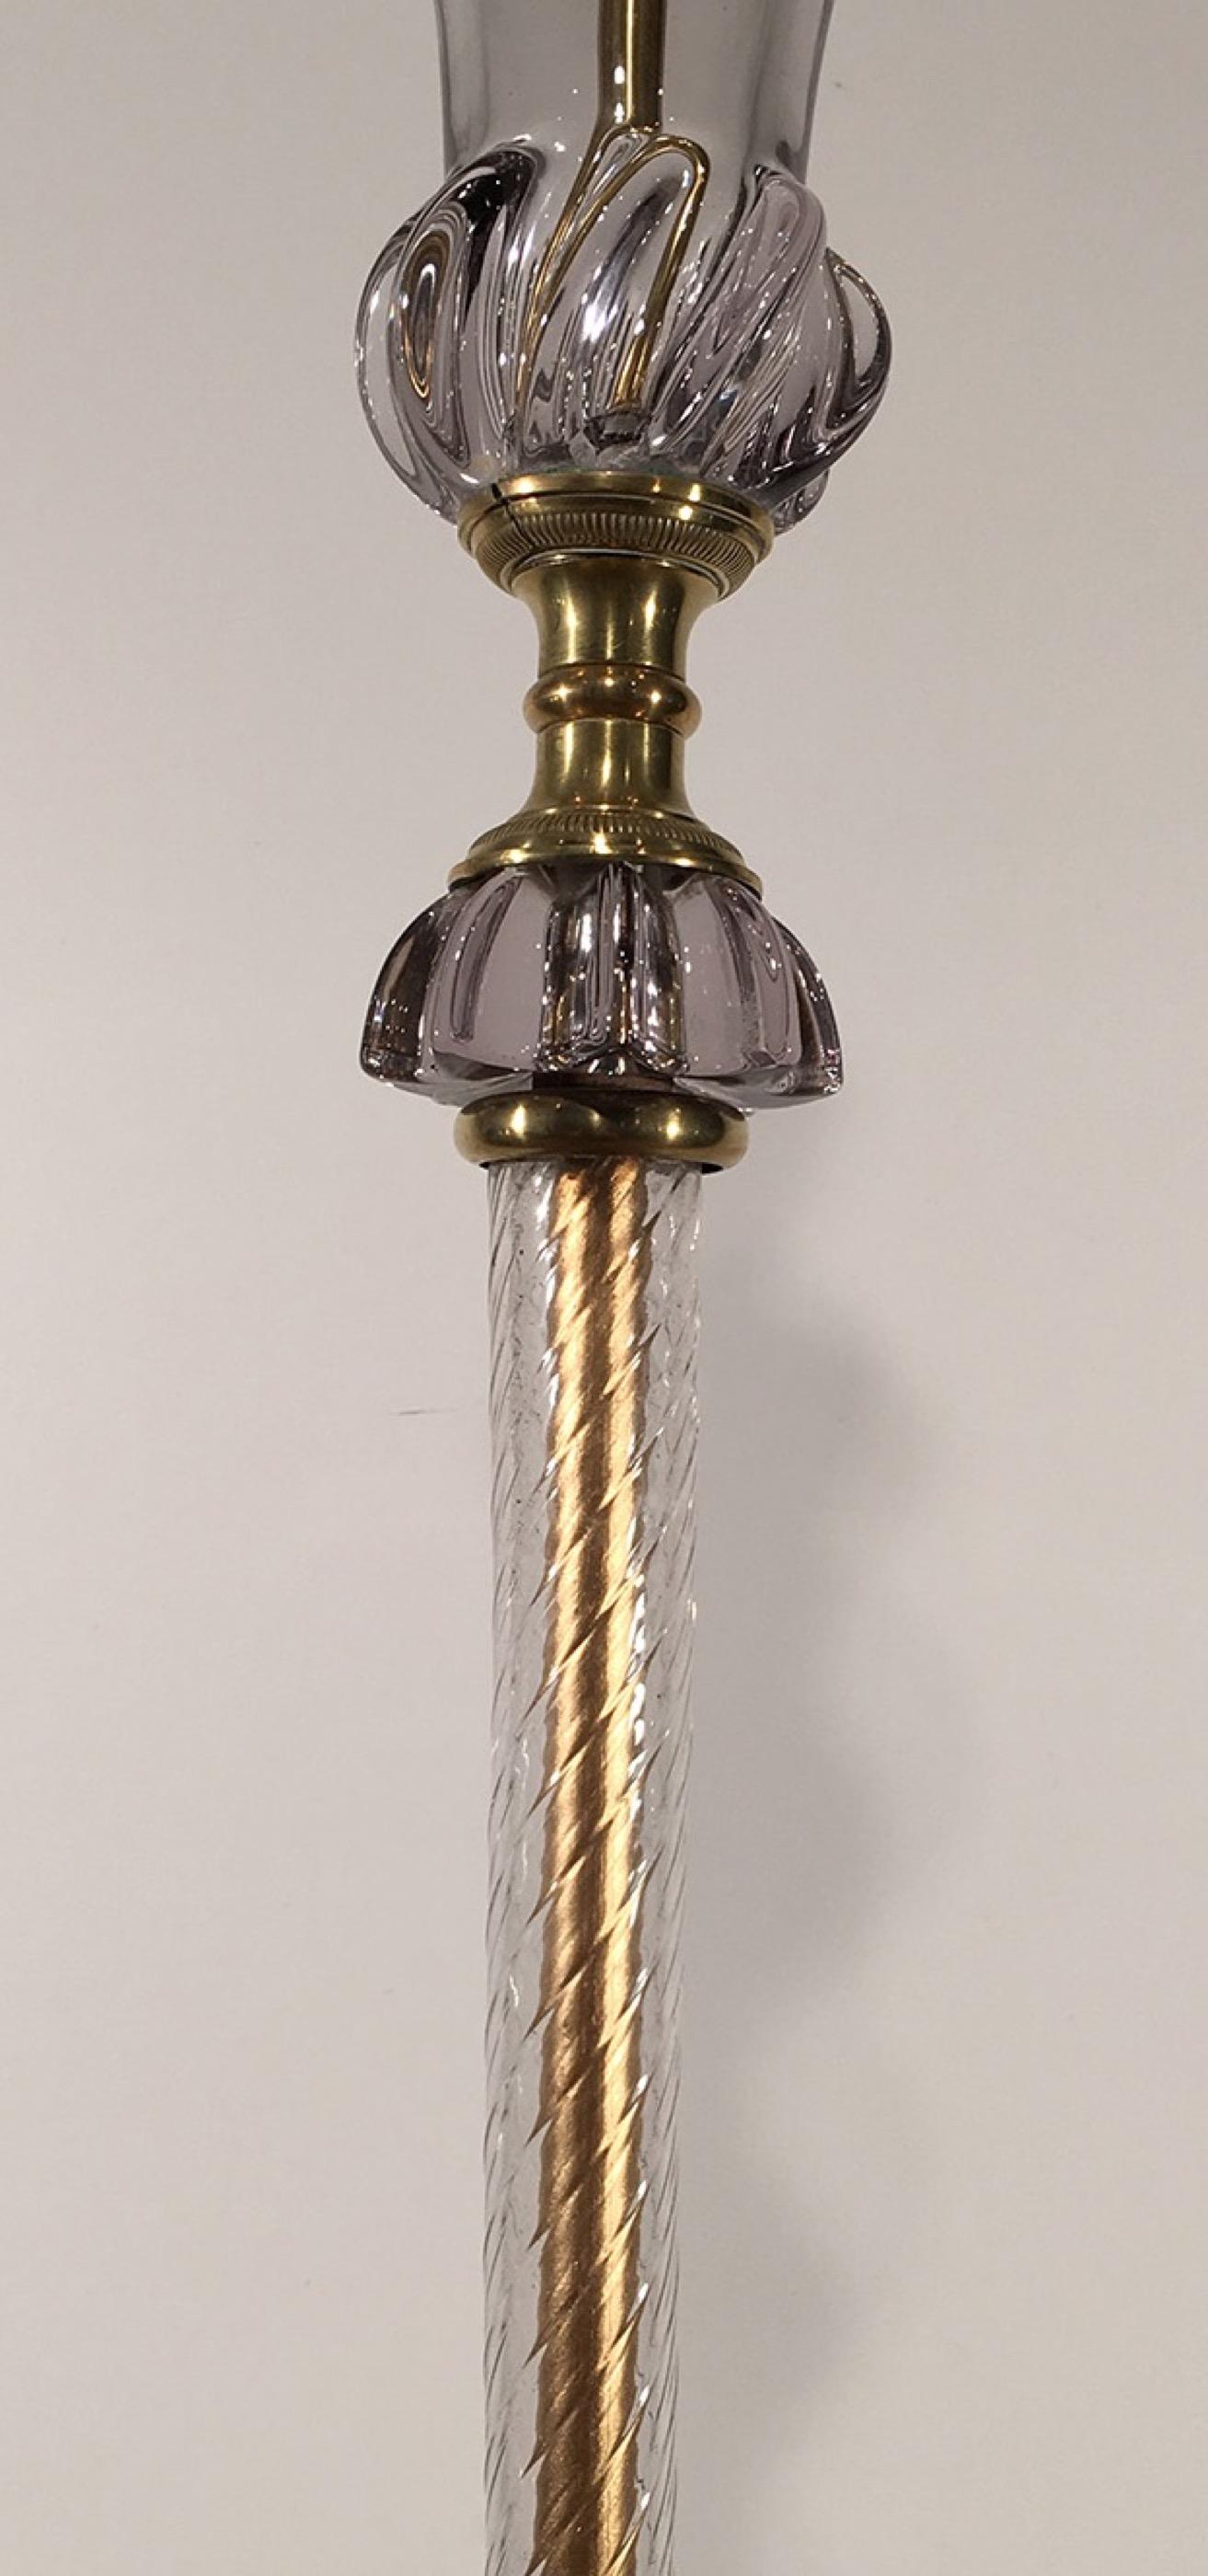 Mid-20th Century Attributed to Barovier & Toso, Murano Glass Floor Lamp, circa 1940 For Sale